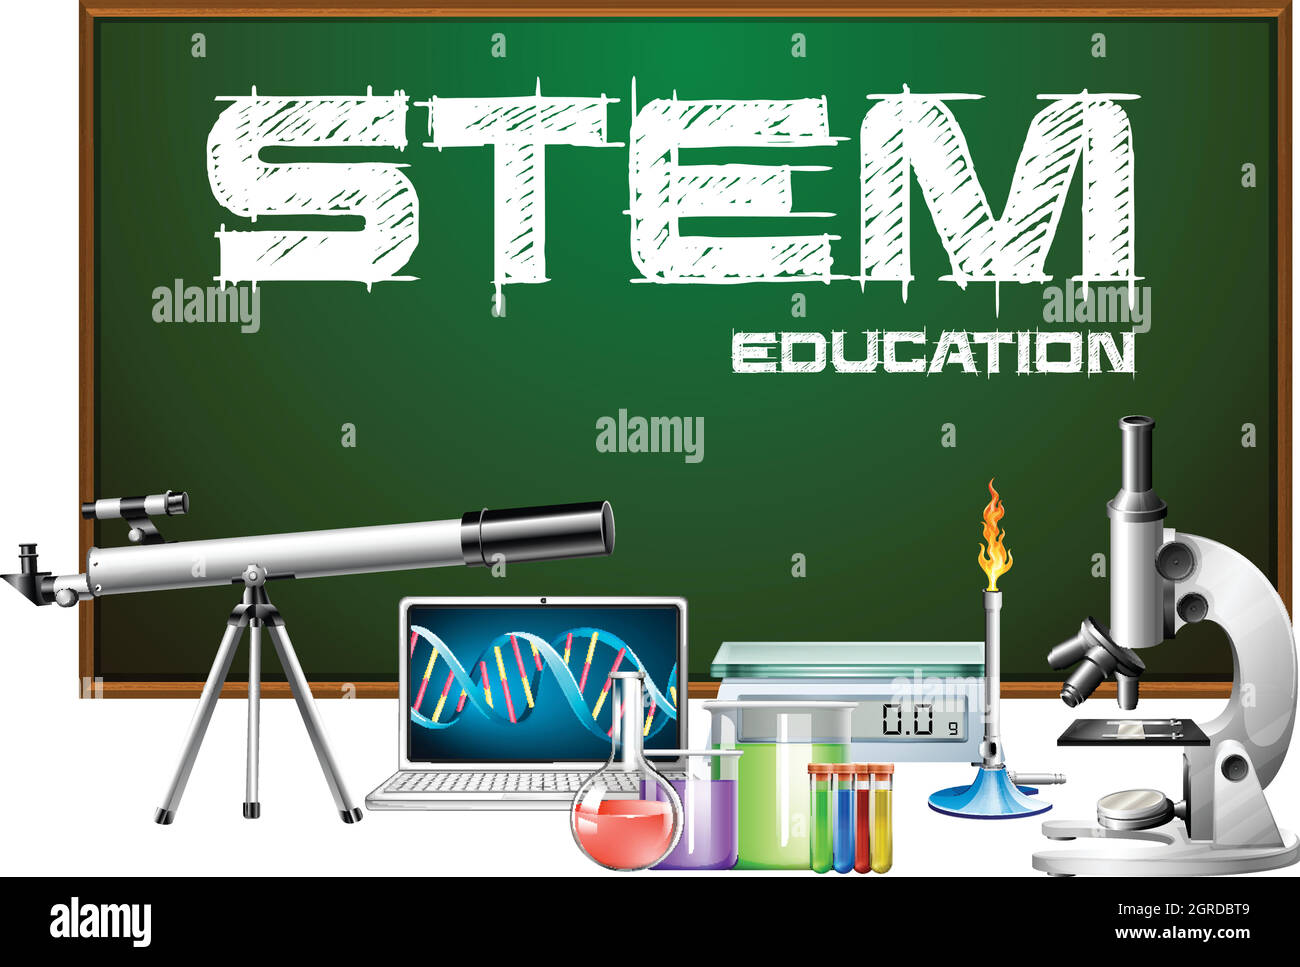 Stem education poster design with science equipments Stock Vector